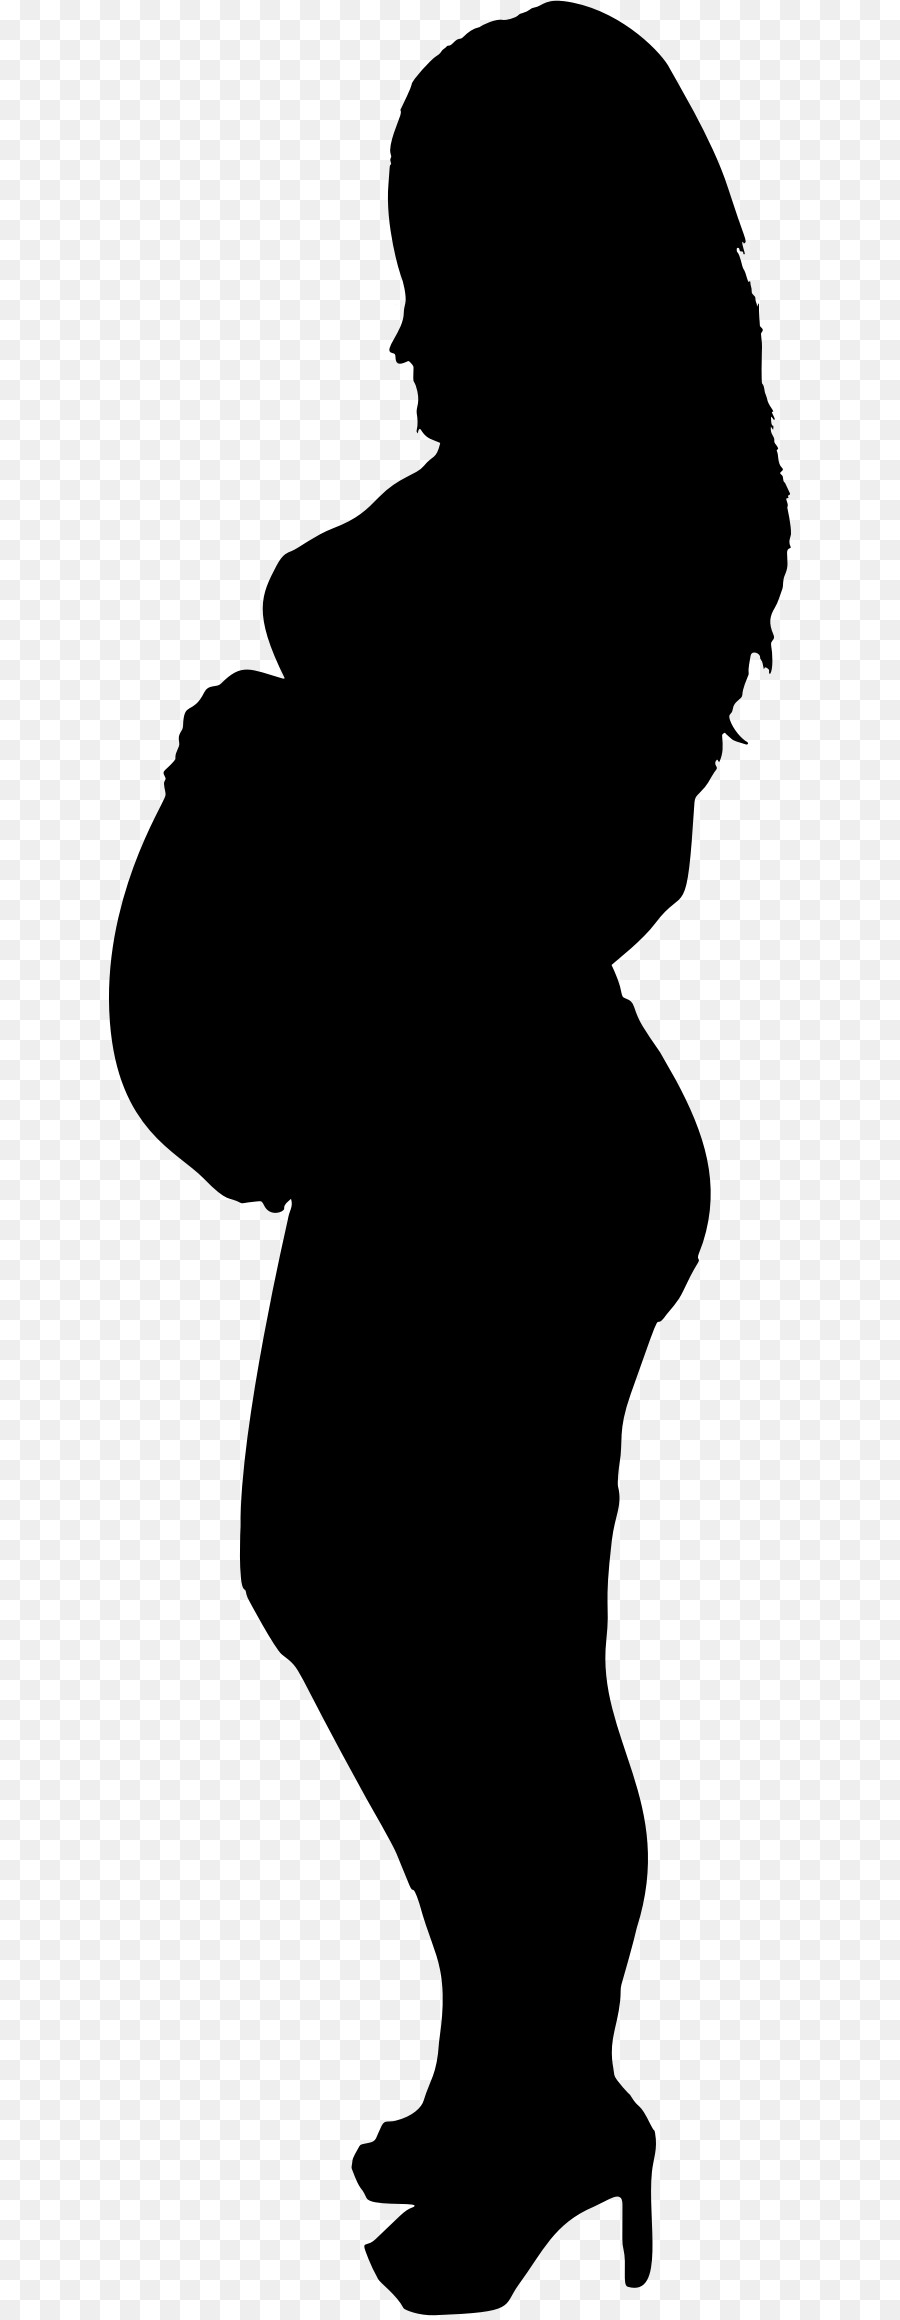 Silhouette Pregnancy Abortion Mother Clip art - pregnant png download - 683*2316 - Free Transparent Silhouette png Download.